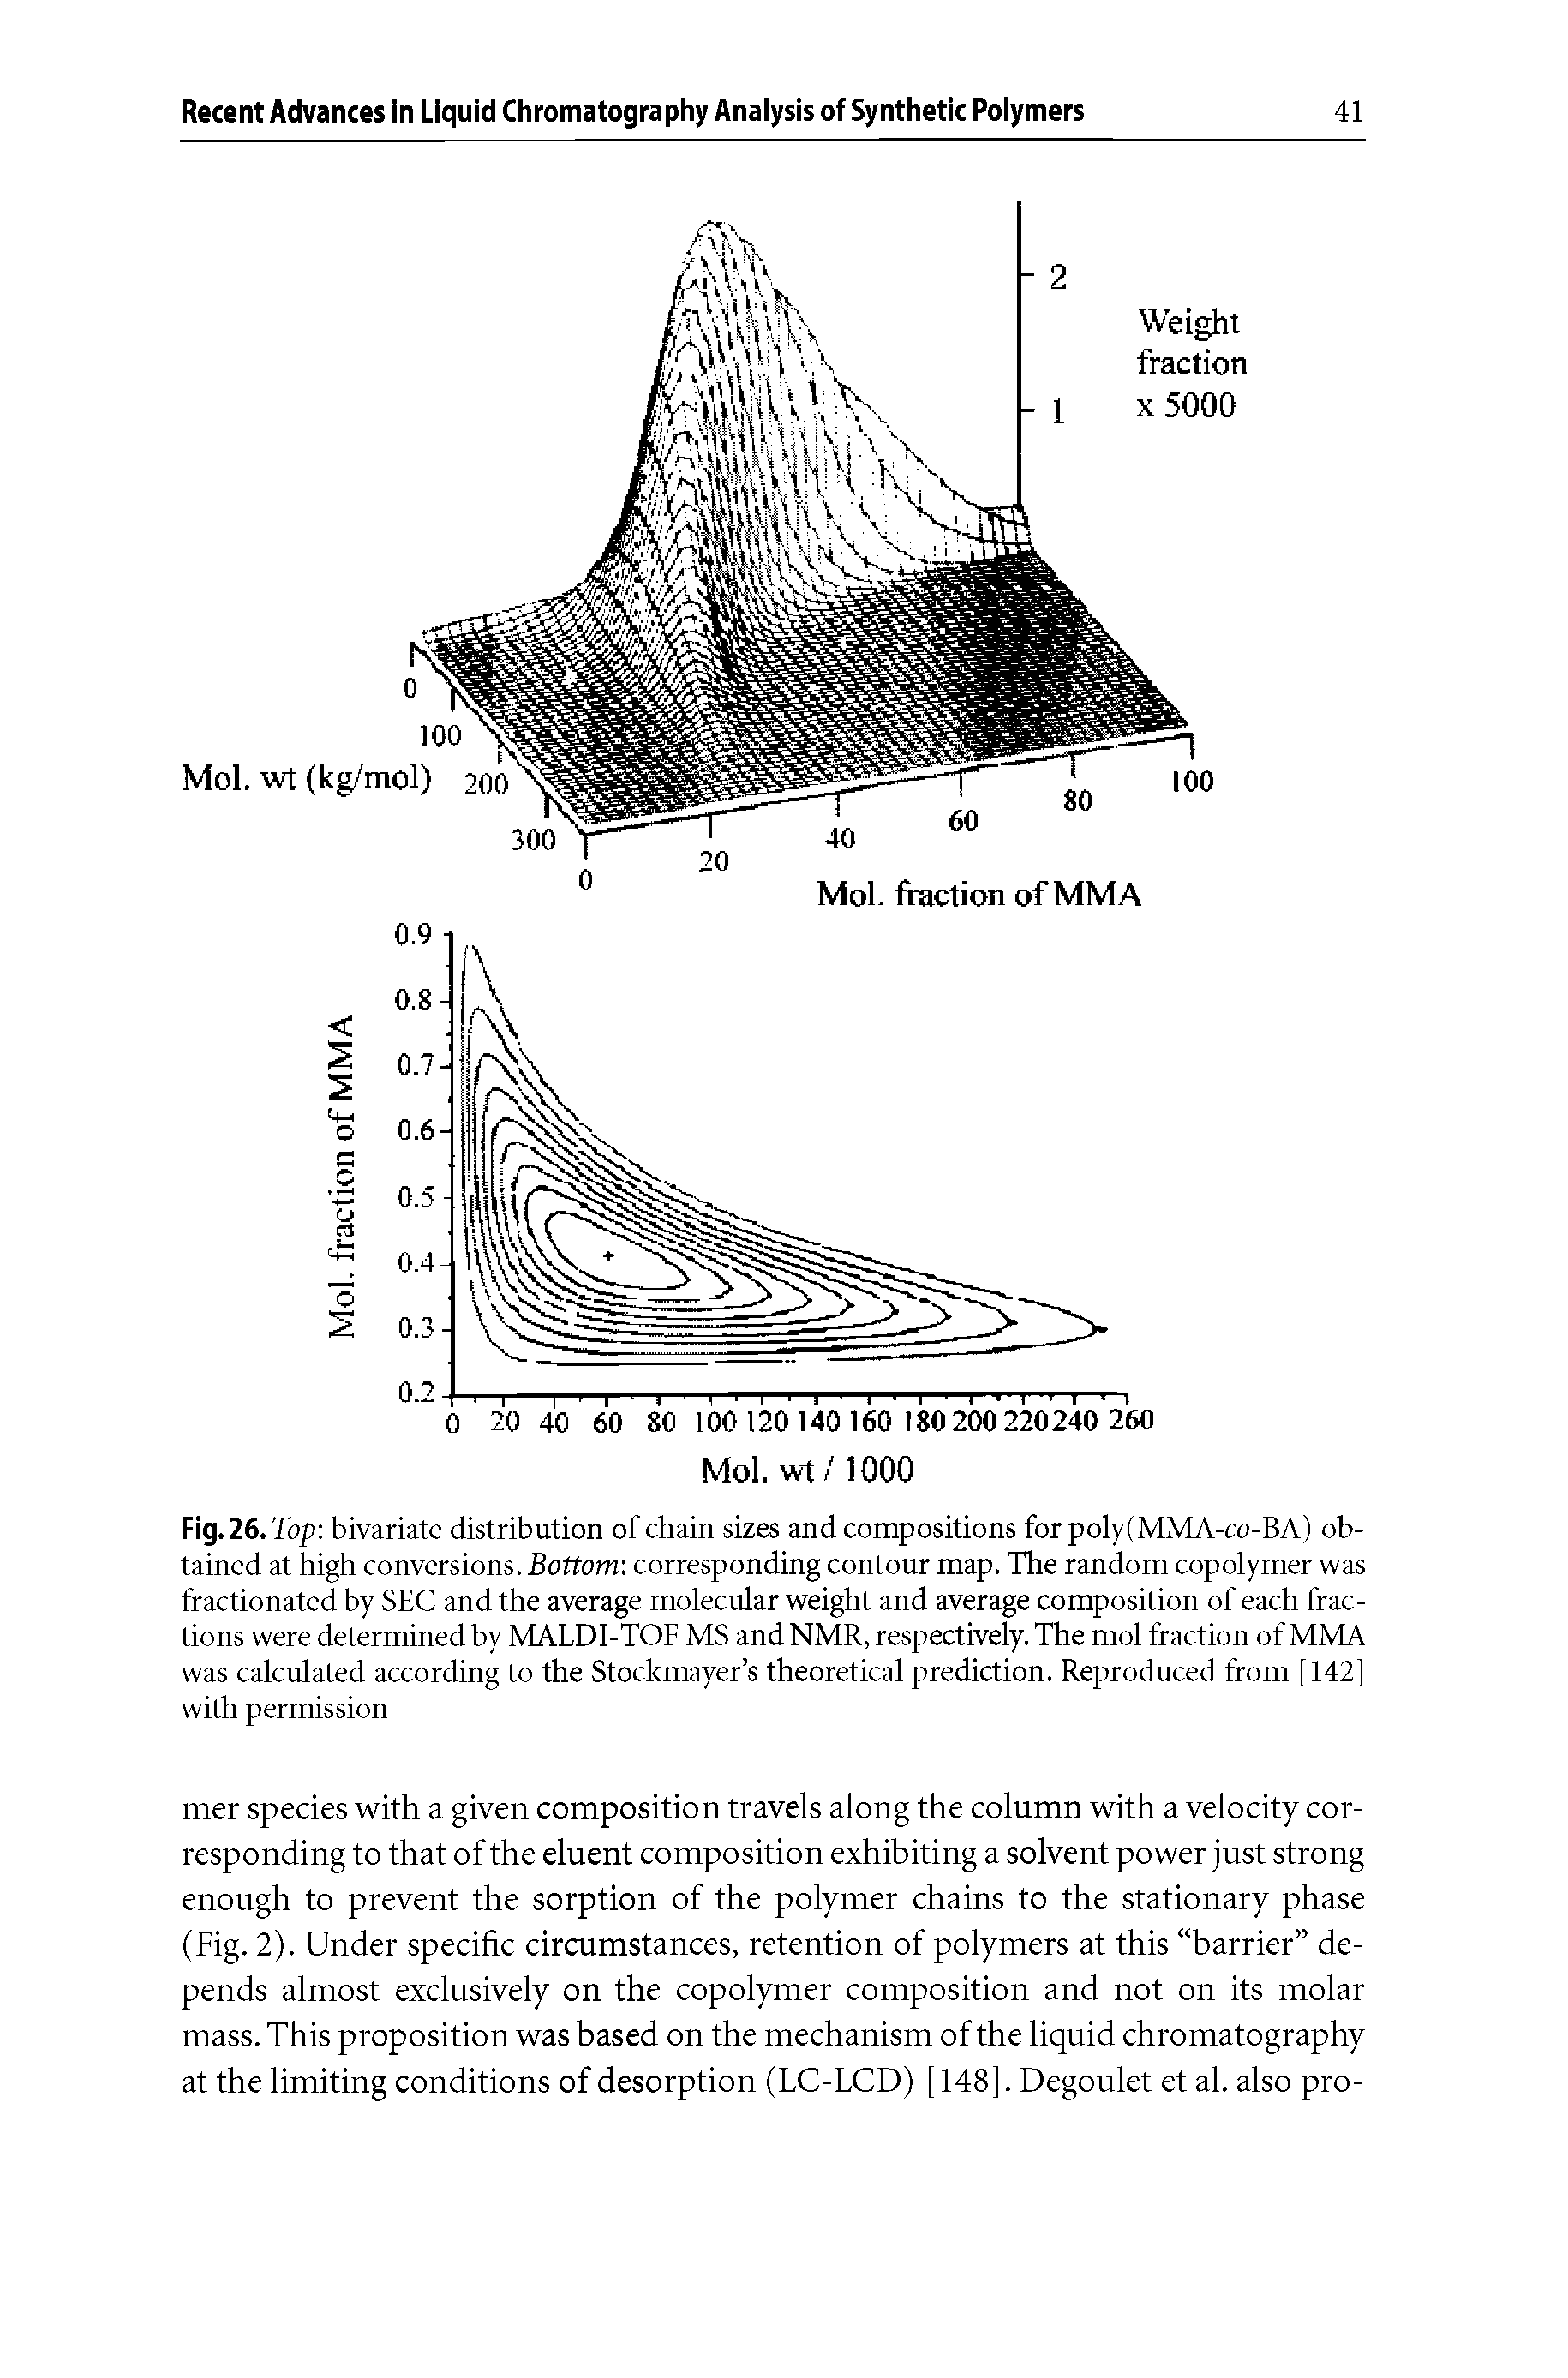 Fig. 26. Top bivariate distribution of chain sizes and compositions for poly(MMA-co-BA) obtained at high conversions. Bottom corresponding contour map. The random copolymer was fractionated by SEC and the average molecular weight and average composition of each fractions were determined by MALDI-TOF MS and NMR, respectively. The mol fraction of MMA was calculated according to the Stockmayer s theoretical prediction. Reproduced from [142] with permission...